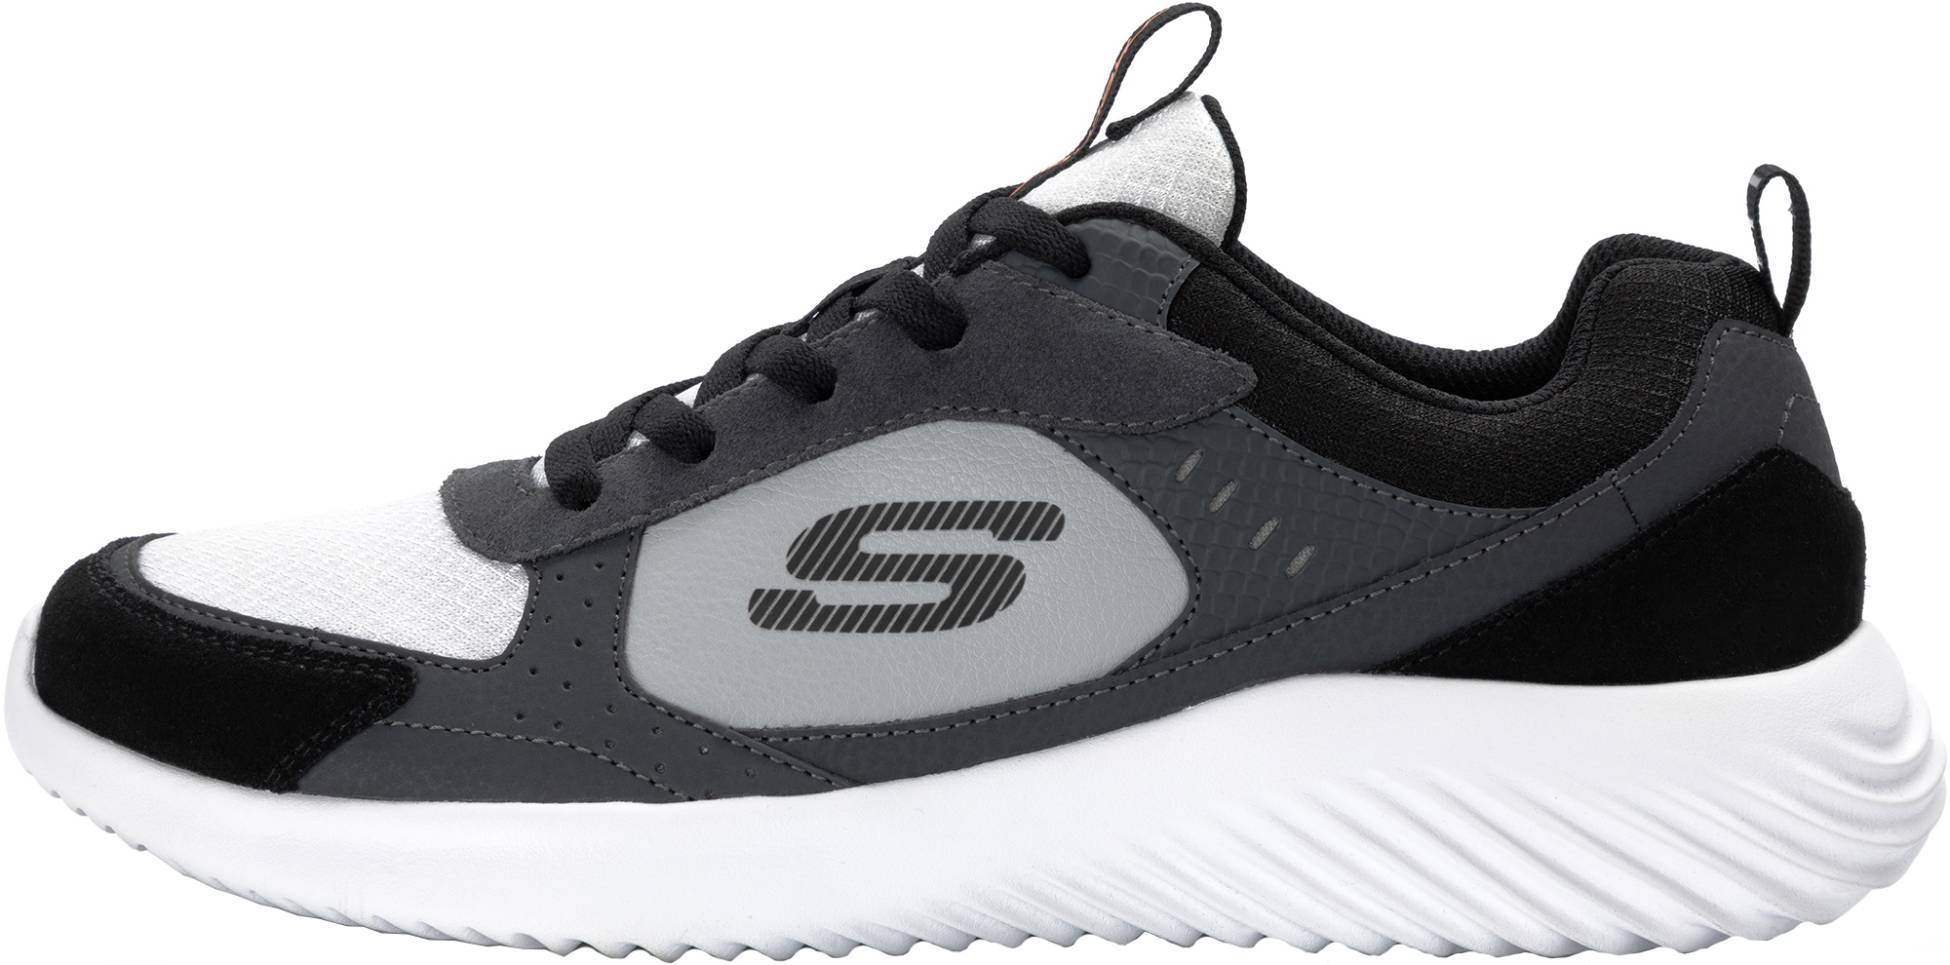 Review of Skechers Bounder Courthall 